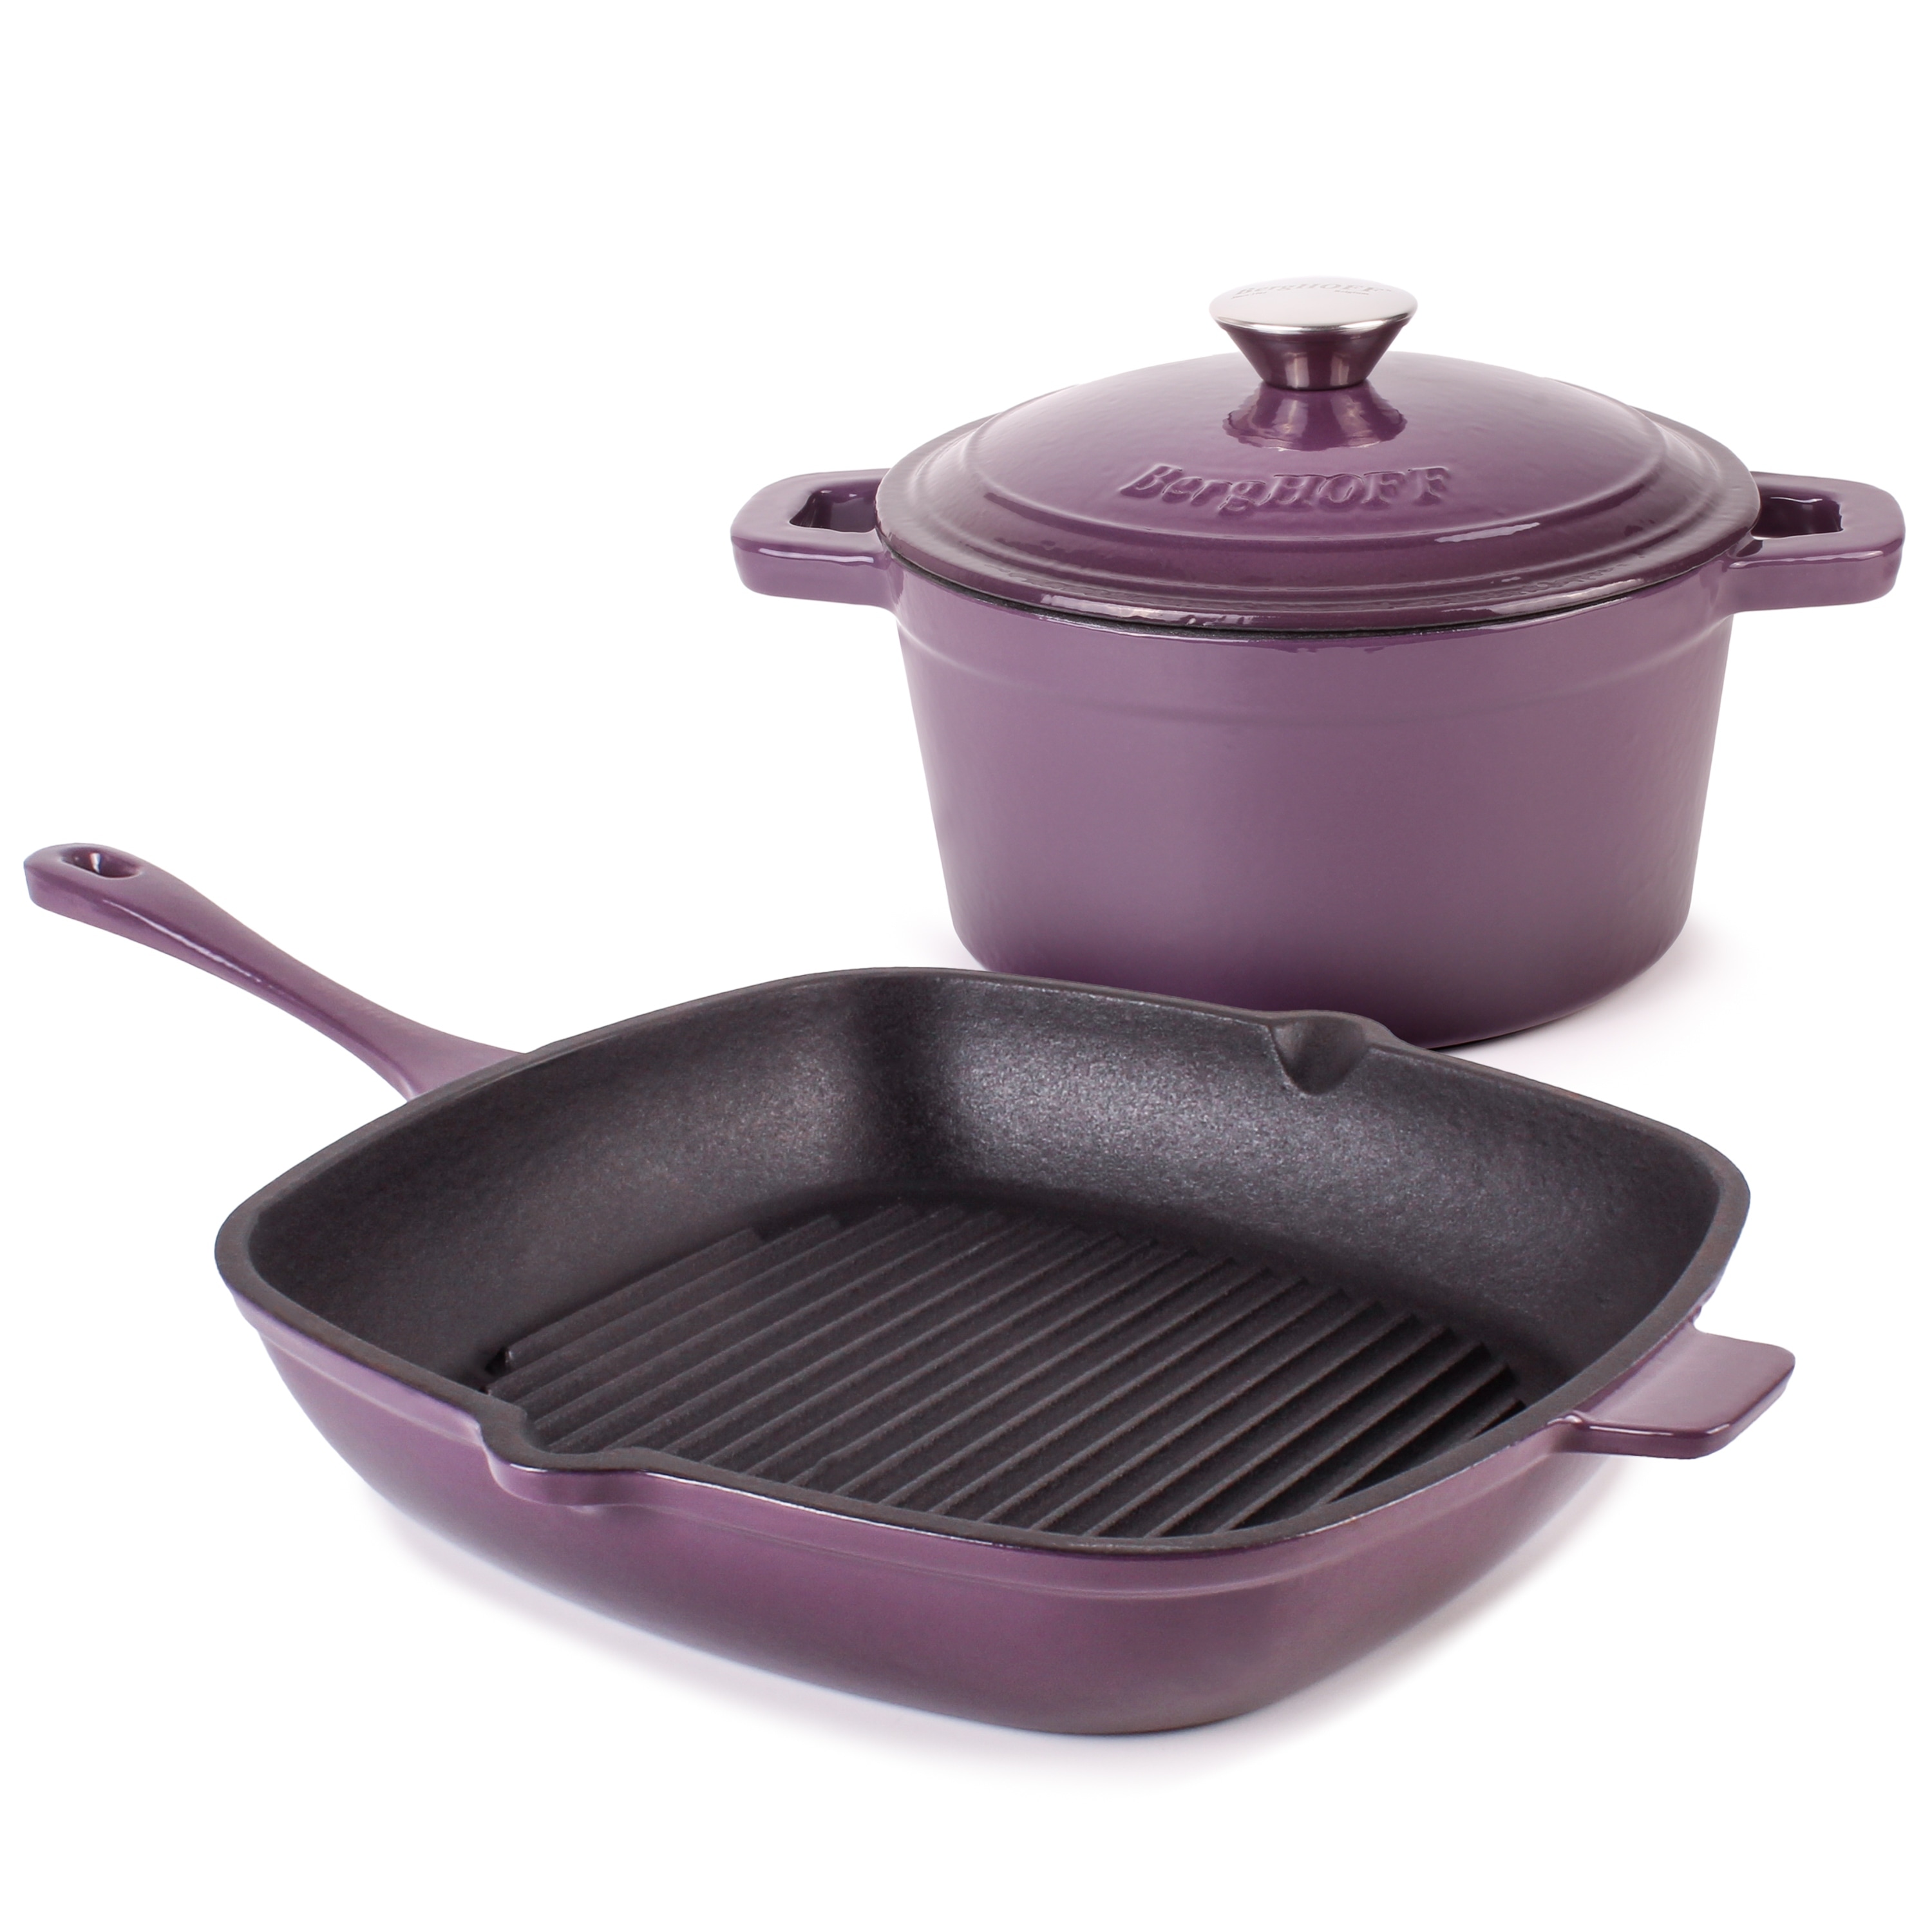 https://ak1.ostkcdn.com/images/products/is/images/direct/76d83783ba328c73cb53fd54f3bcac777dd06ad2/Neo-3pc-Cast-Iron-Set-3qt-Covered-Dutch-Oven-%26-11%22-Grill-Pan-Purple.jpg